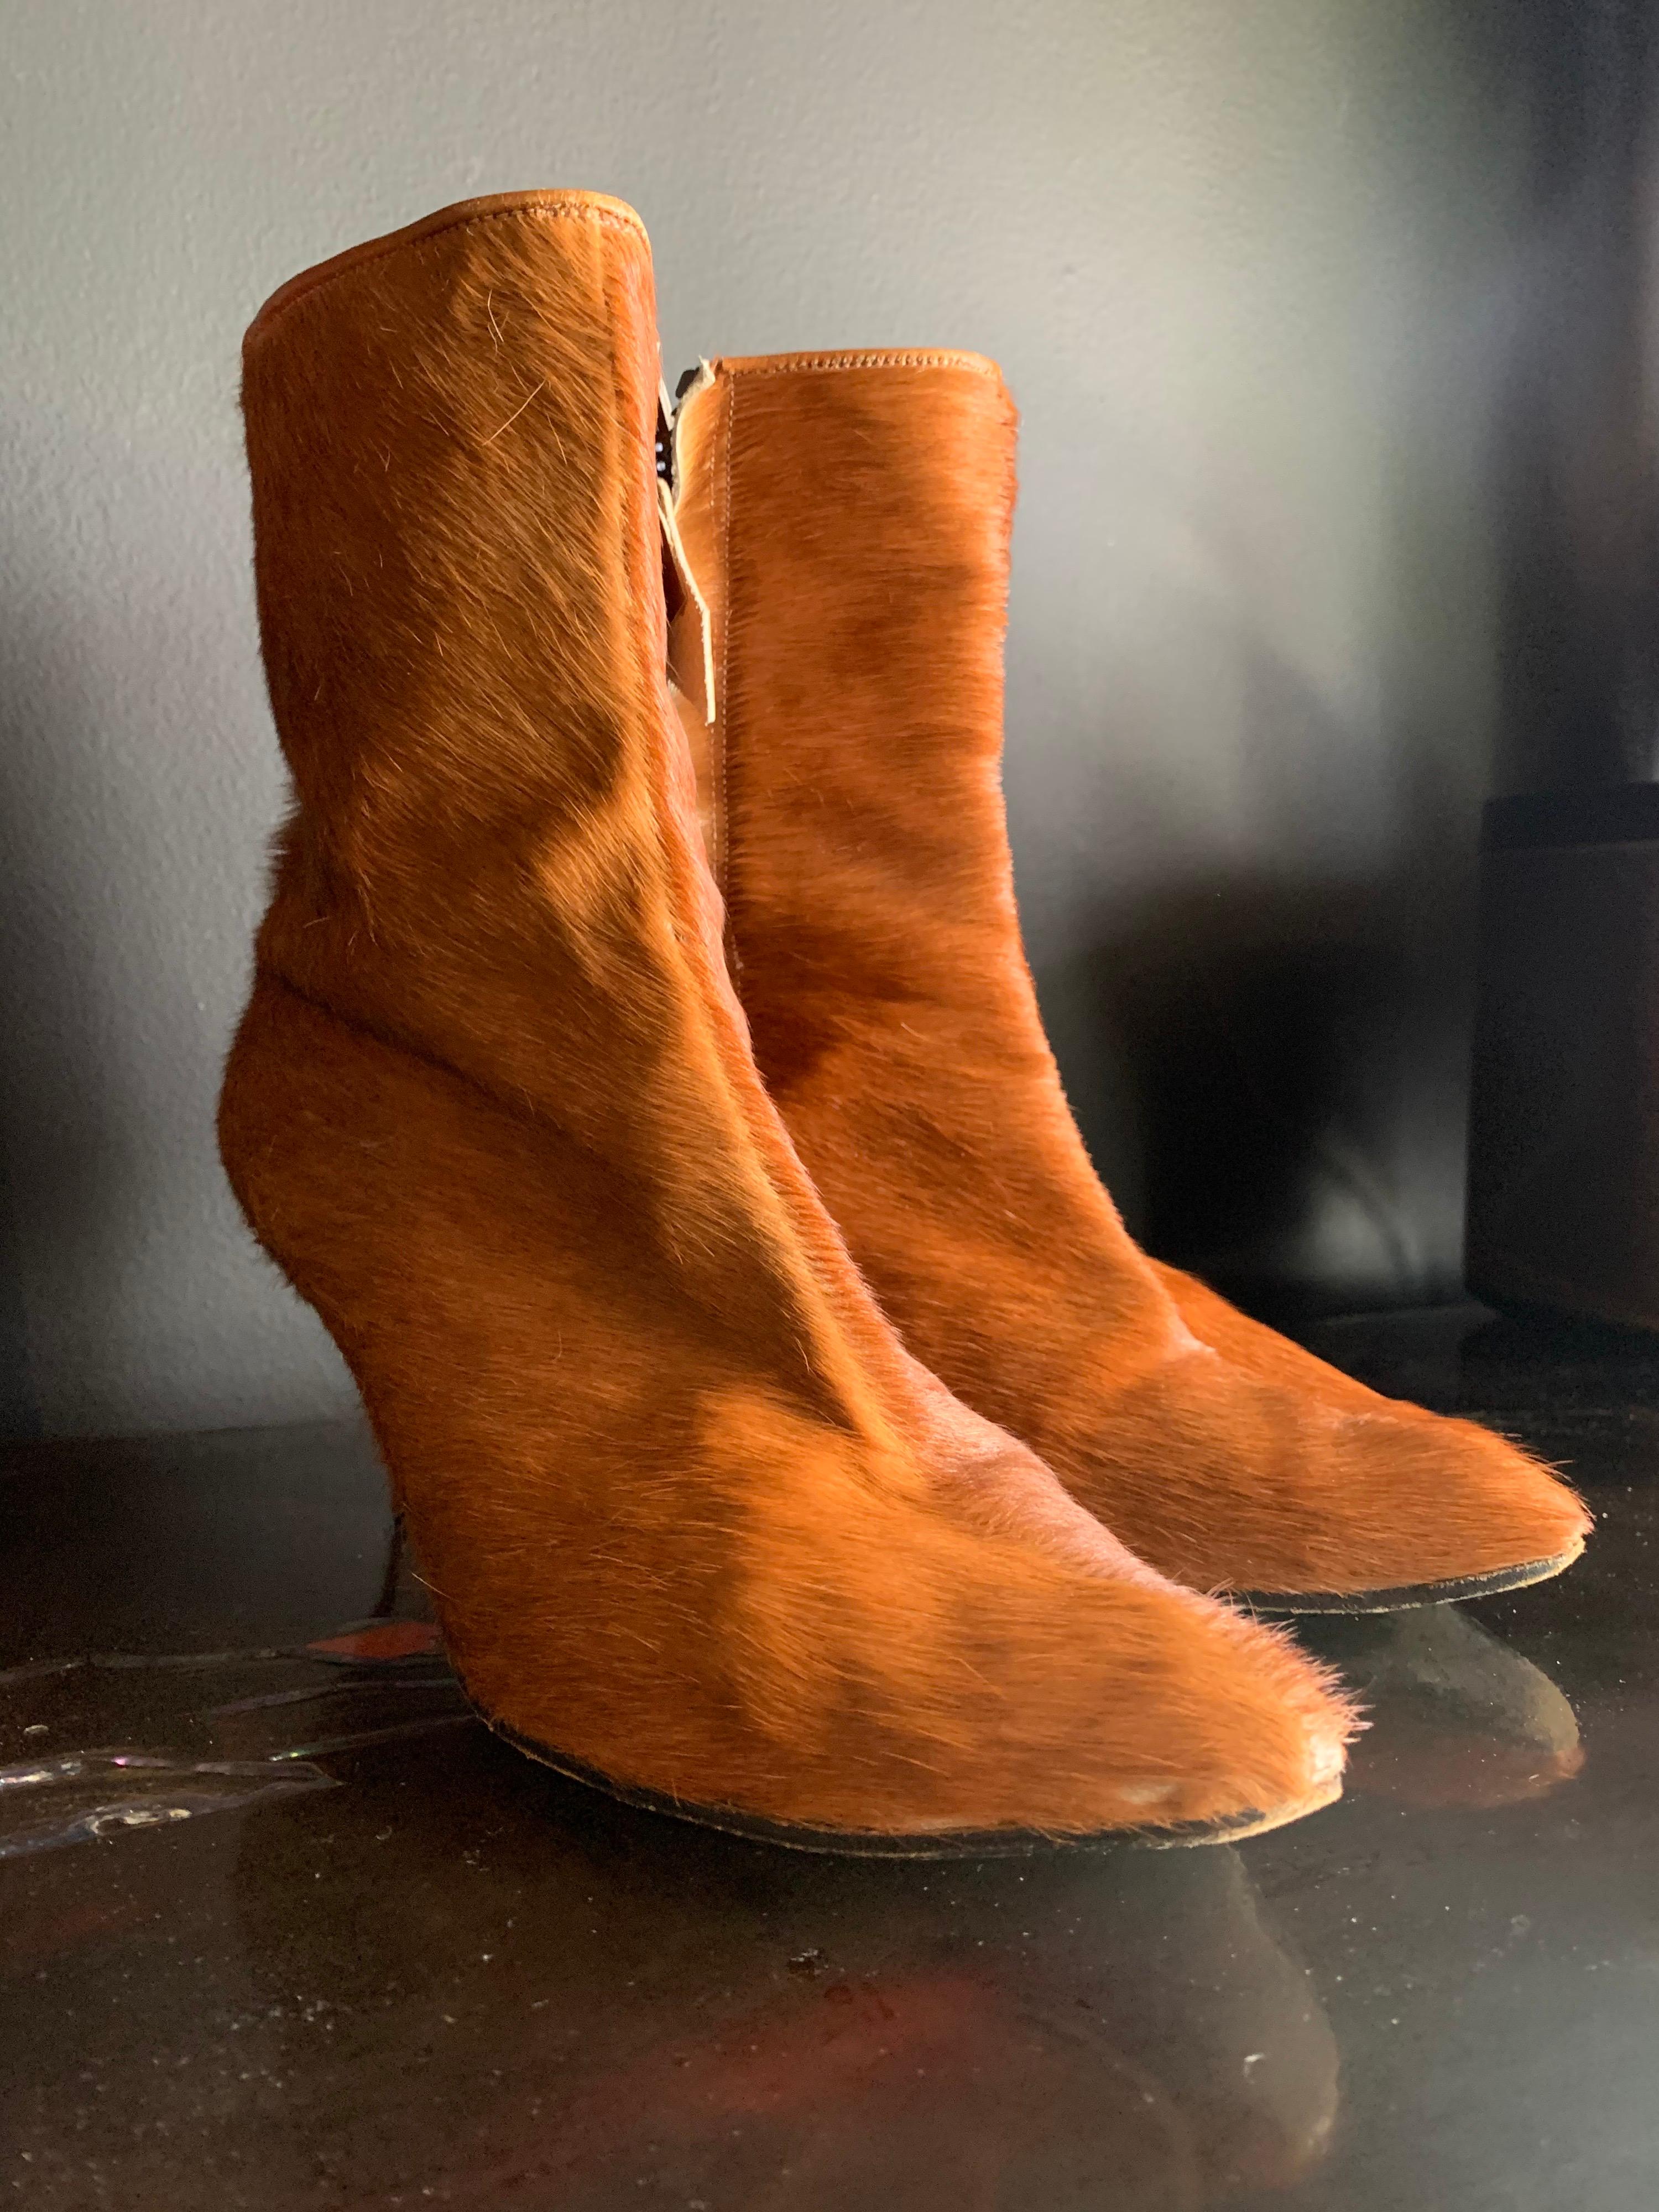 A fun pair of early 1960s fawn color hide Mod go-go booties from Albertina of Florence Italy. Zippered side, pointed toe with a kitten heel. Size 7.5. 